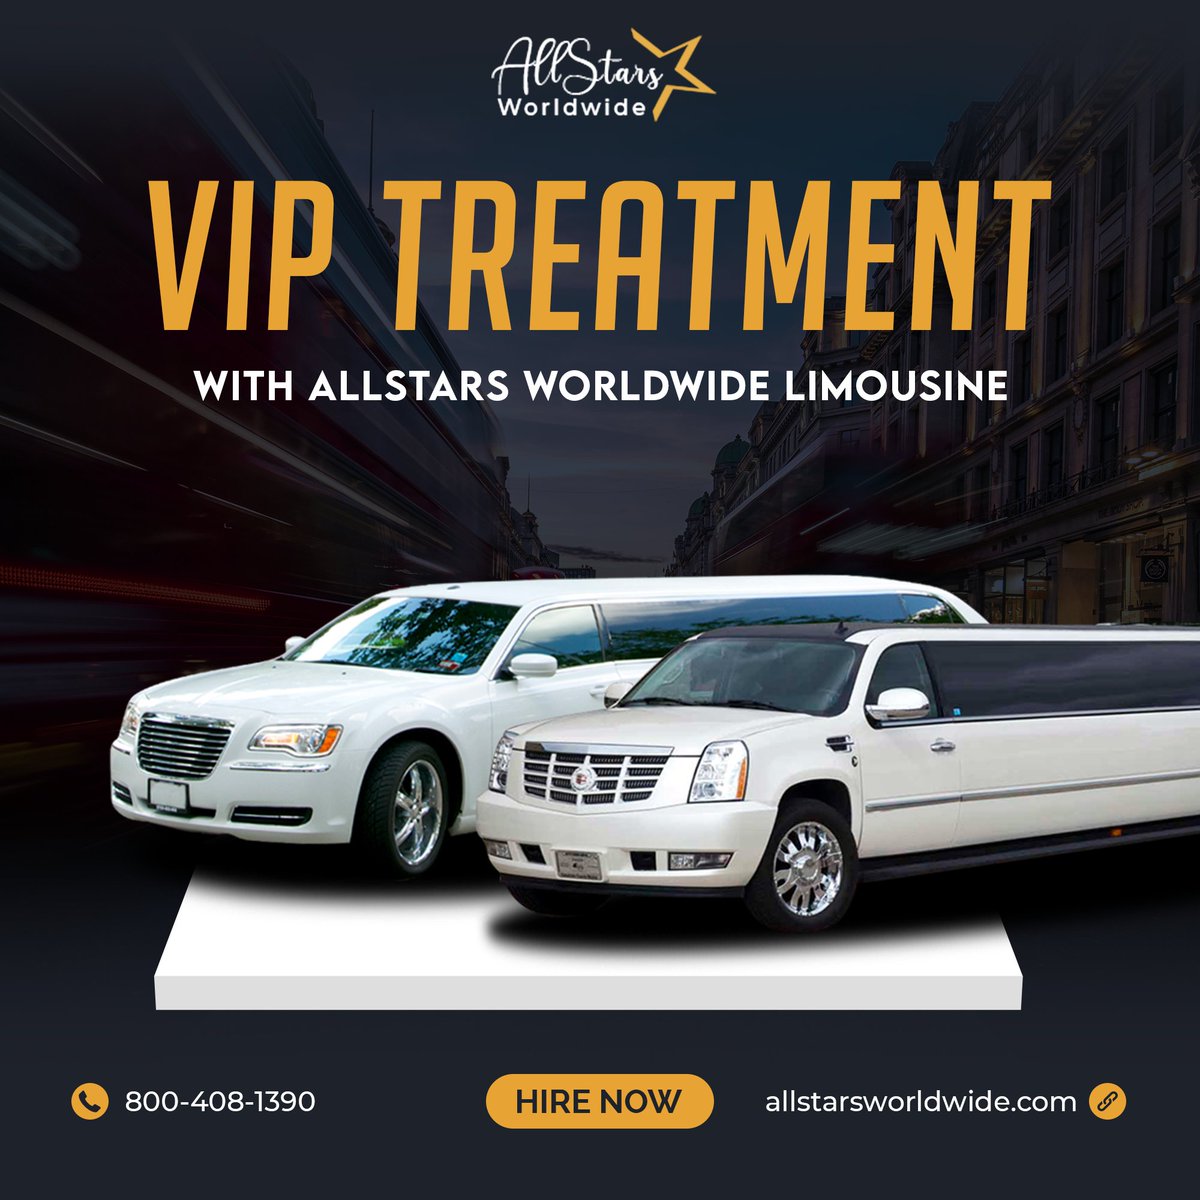 Experience the VIP treatment with AllStars Worldwide Limousine. Your satisfaction is our priority. 👑
#VIPTreatment
#SatisfactionGuaranteed 👑🚗